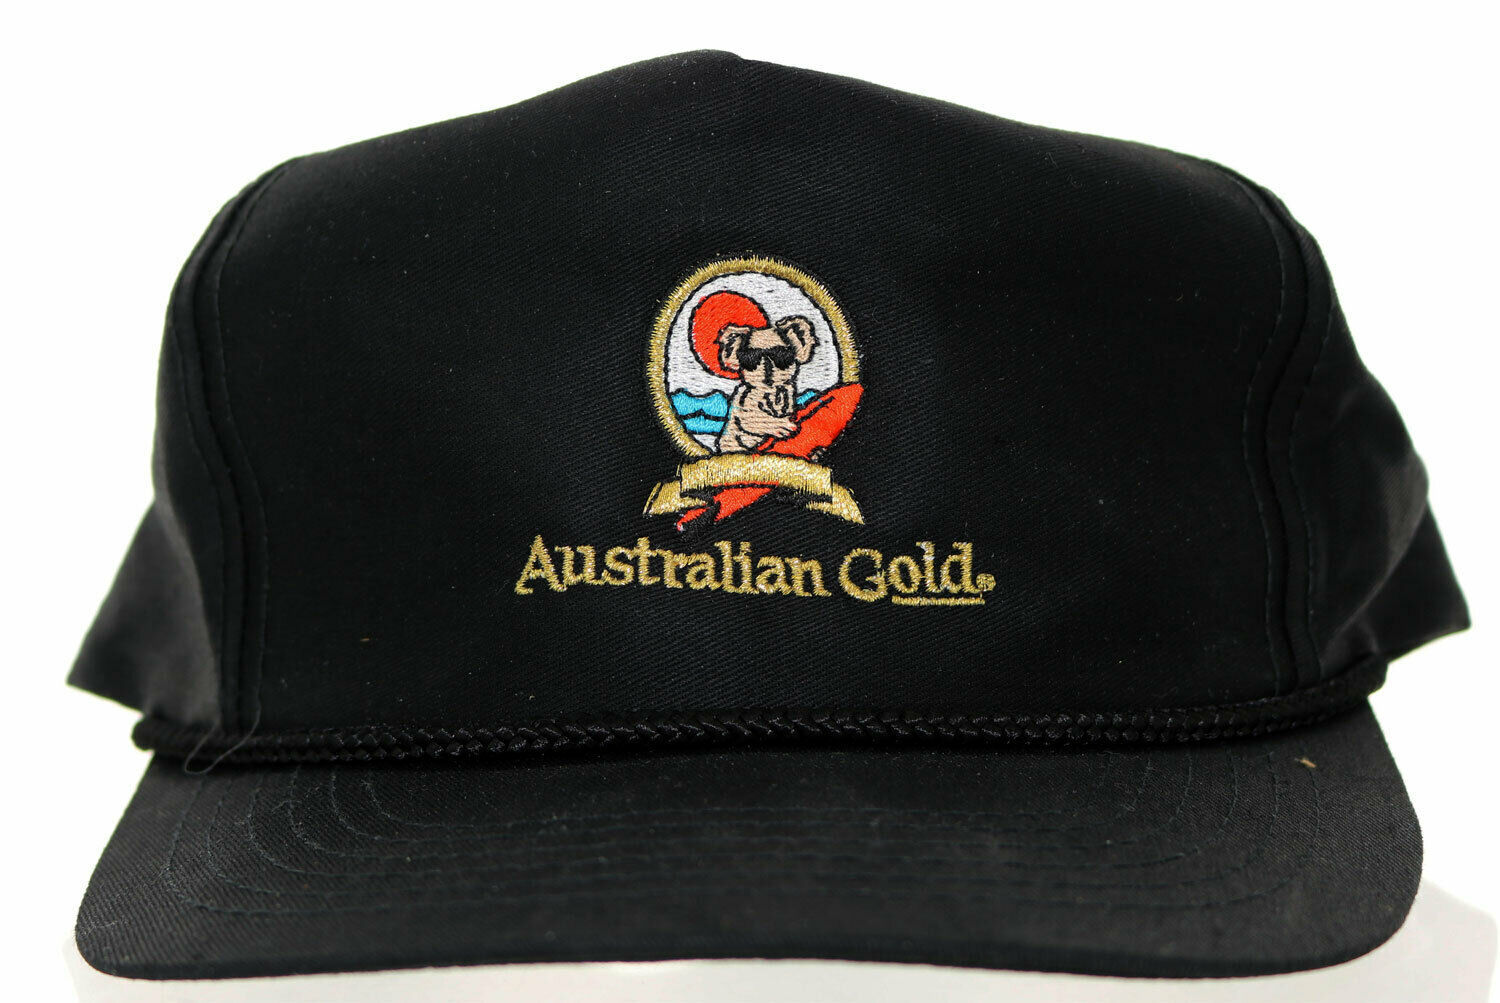 Primary image for Australian Gold Cap. Black with AG Logo embroidered  on the front crown